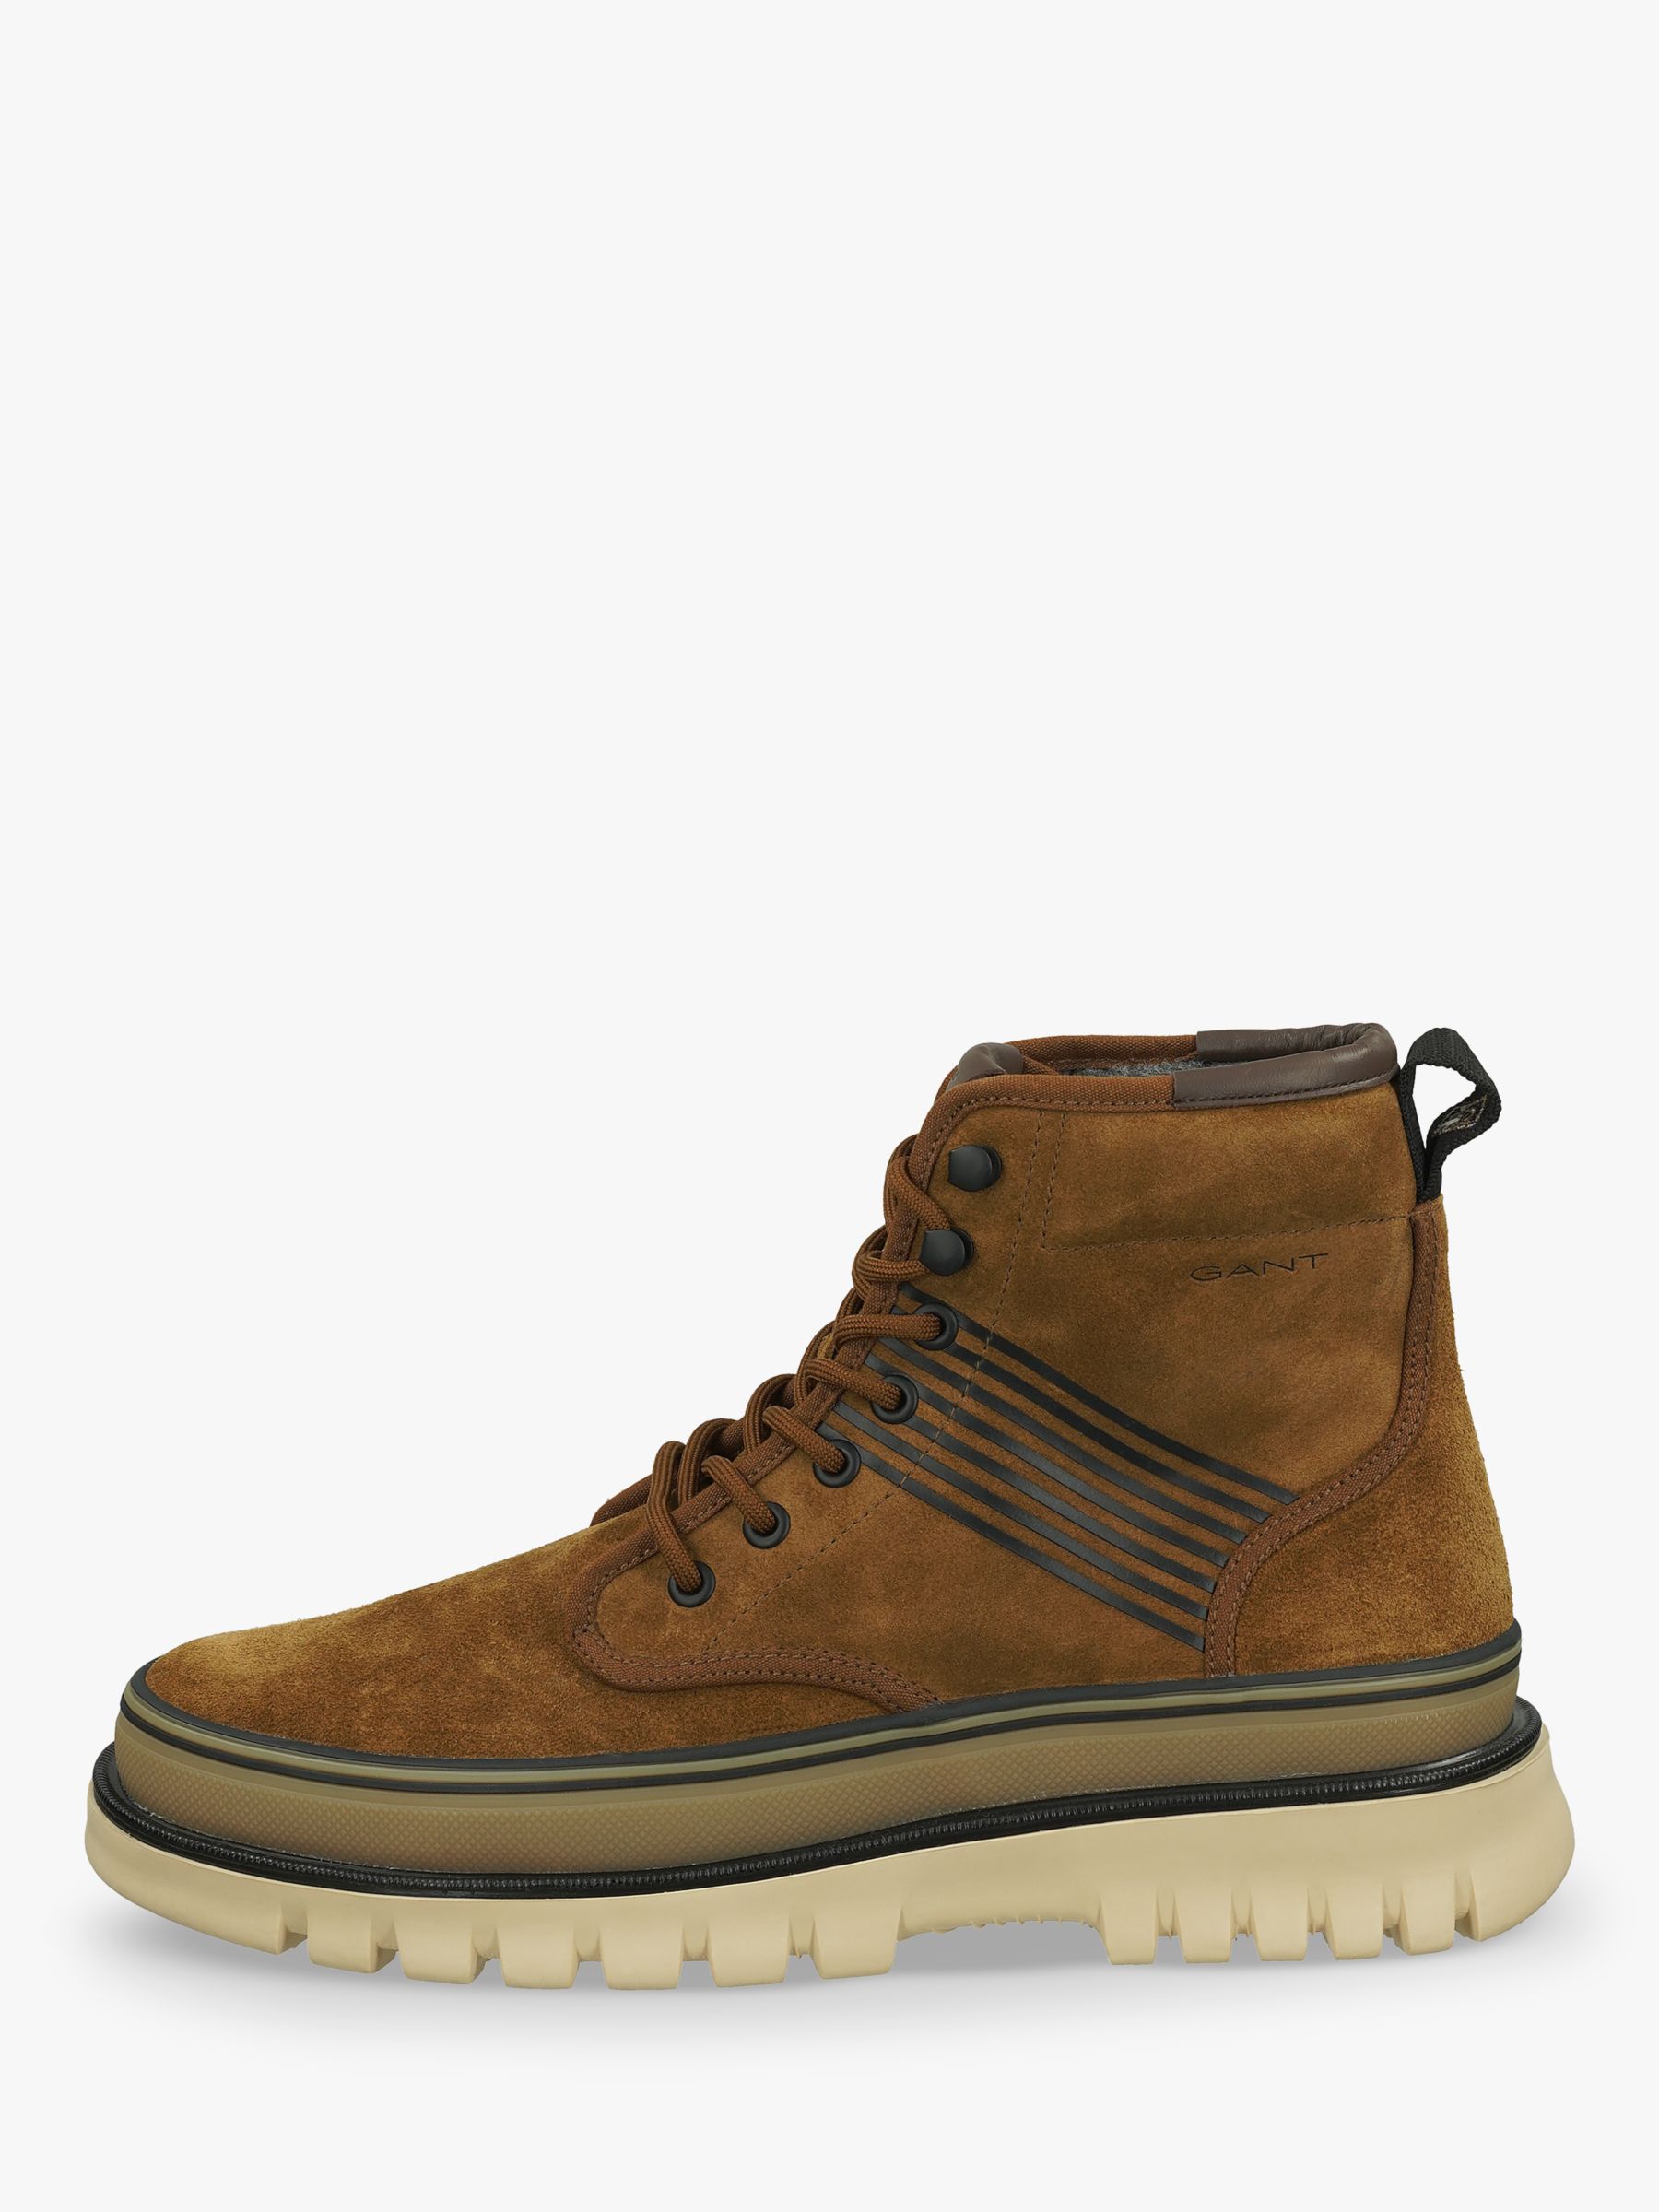 GANT Nebrada Suede Lace Up Boots, Tobacco Brown